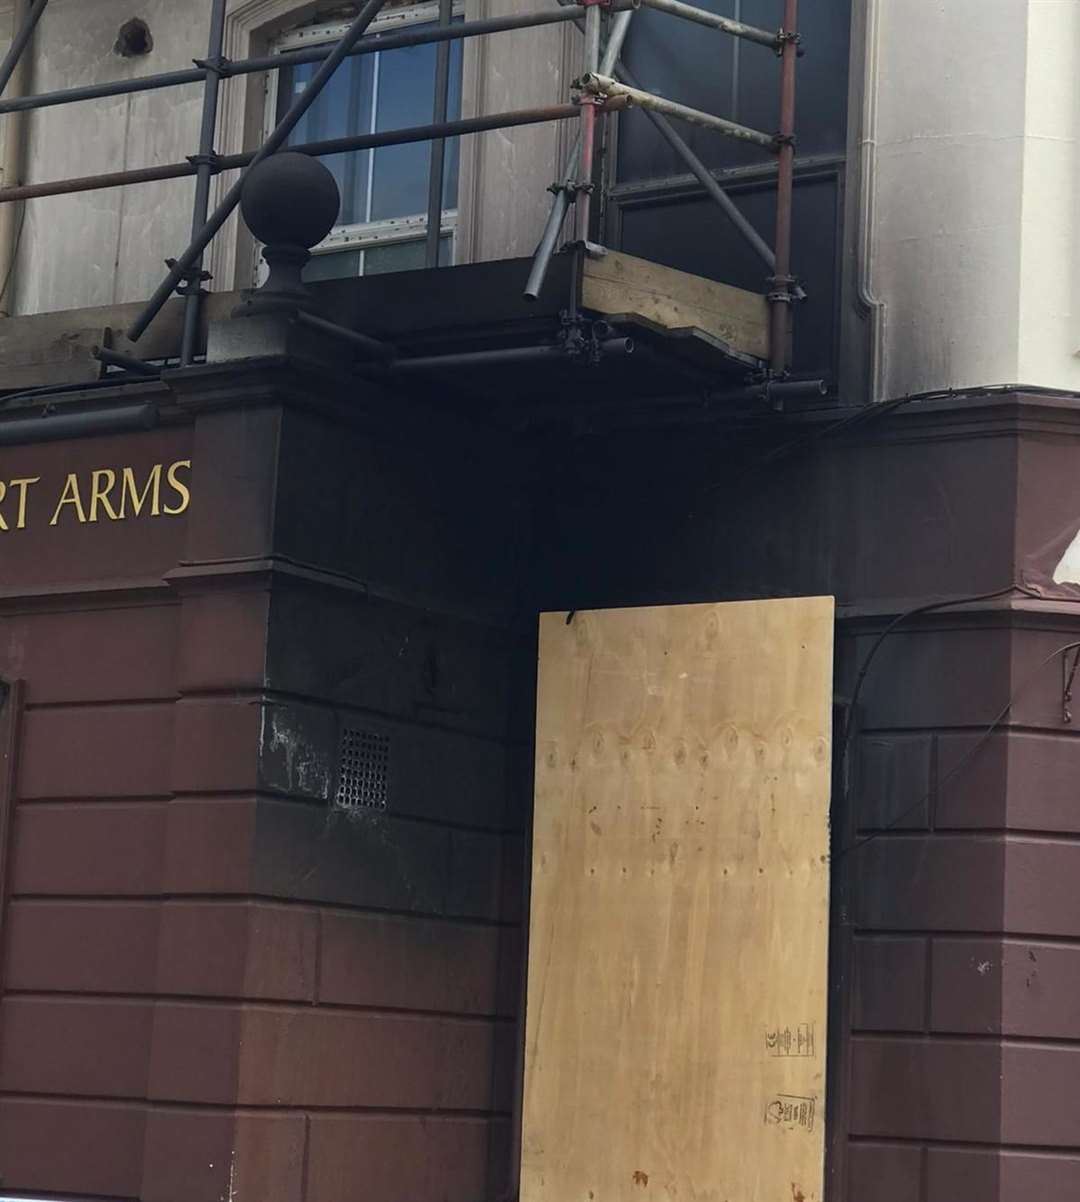 The 19th century pub was boarded up this morning